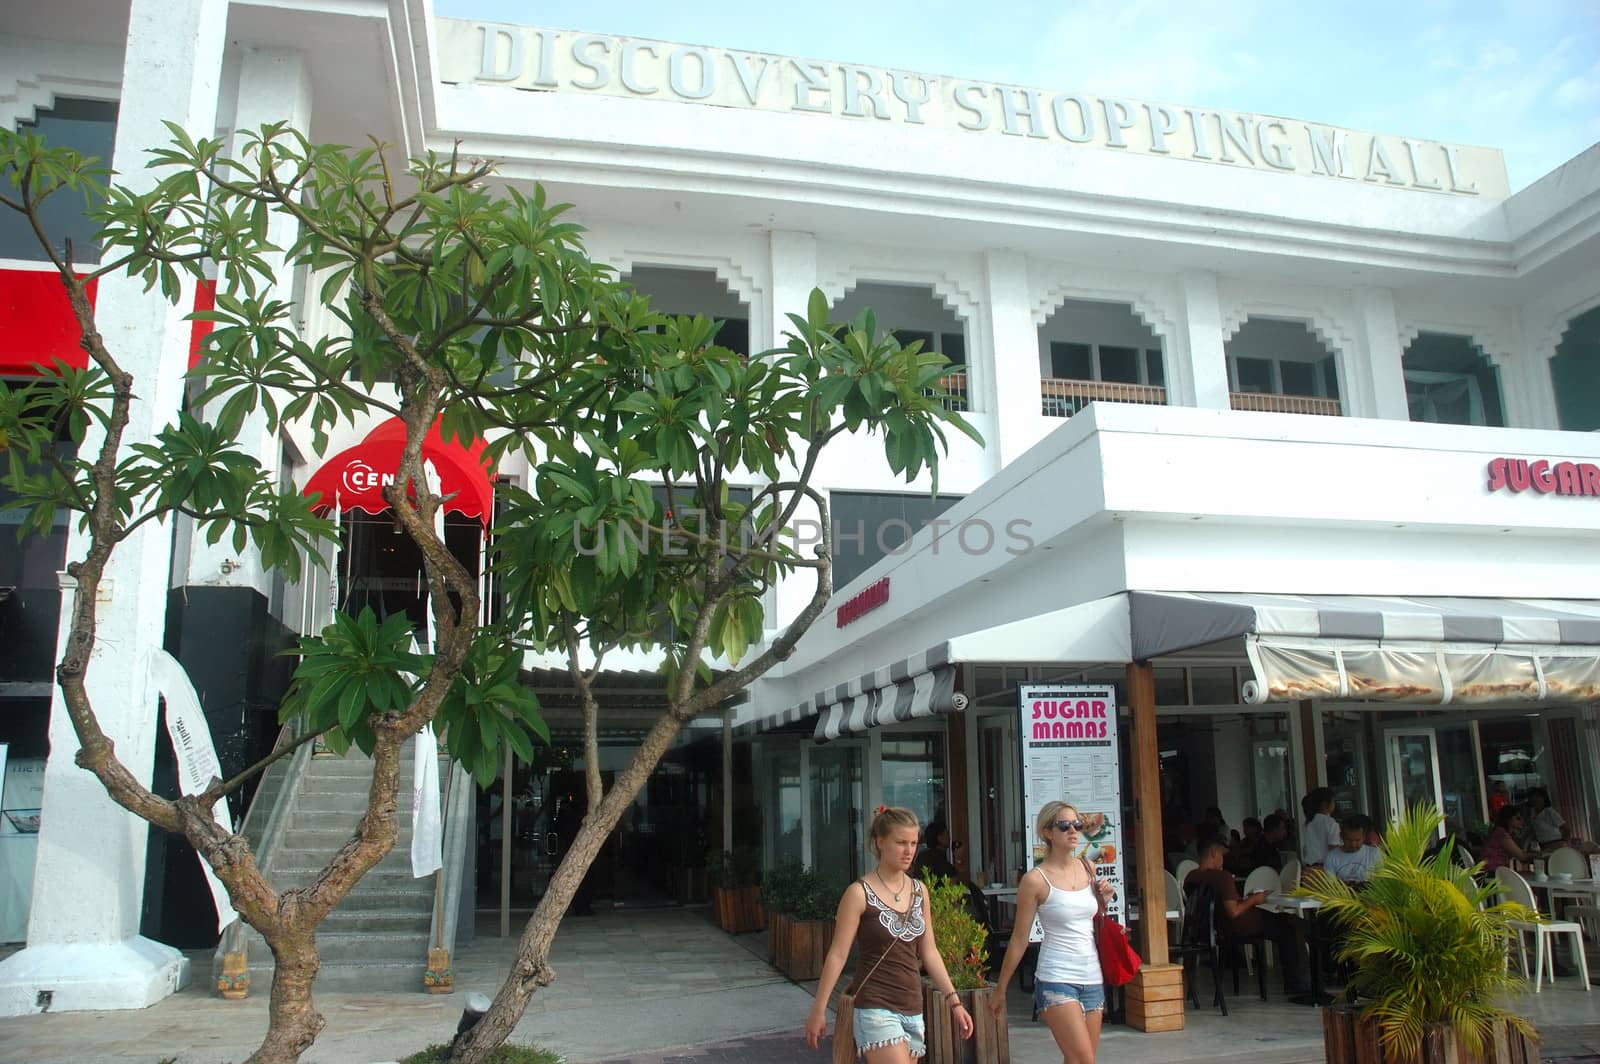 Discovery shopping mall by bluemarine